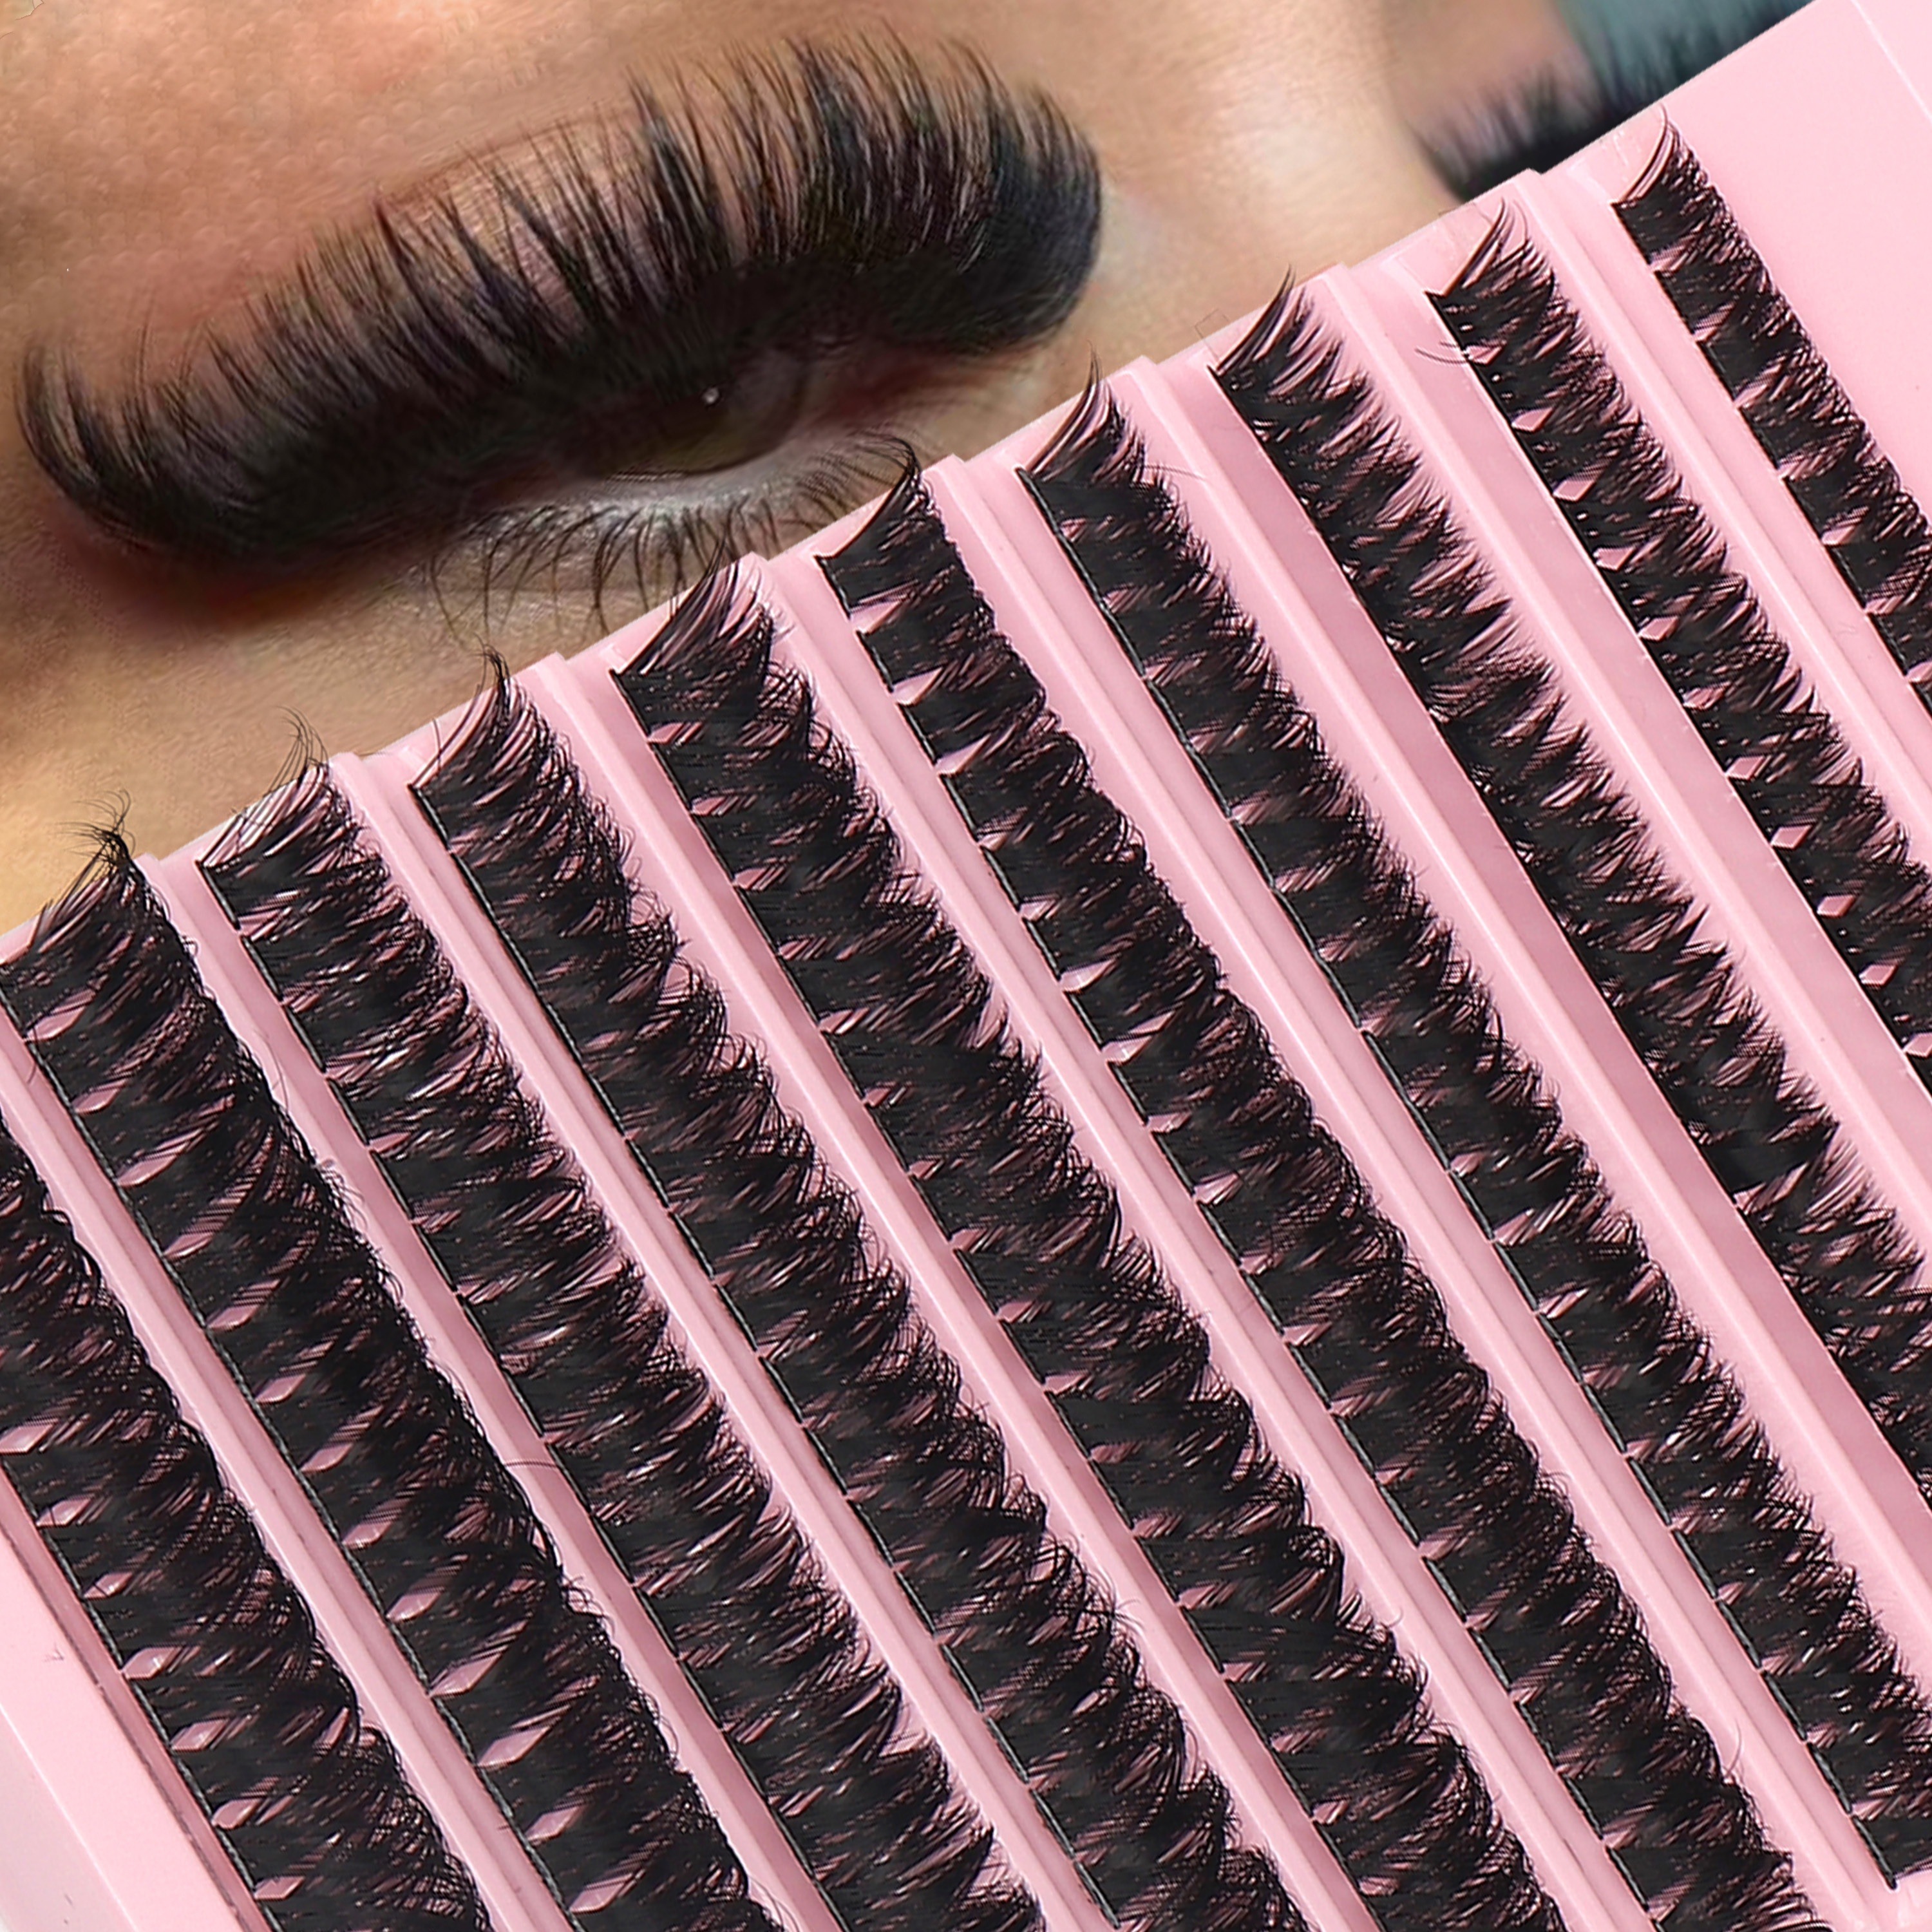 

200-piece Soft & Lightweight 80dd Cluster Eyelash Extensions - Mixed Lengths 8-16mm, Ultra-fine 0.07mm, Waterproof Faux Mink Lashes For All Eye Shapes, Diy 3d Effect, Perfect For Daily Wear & Parties